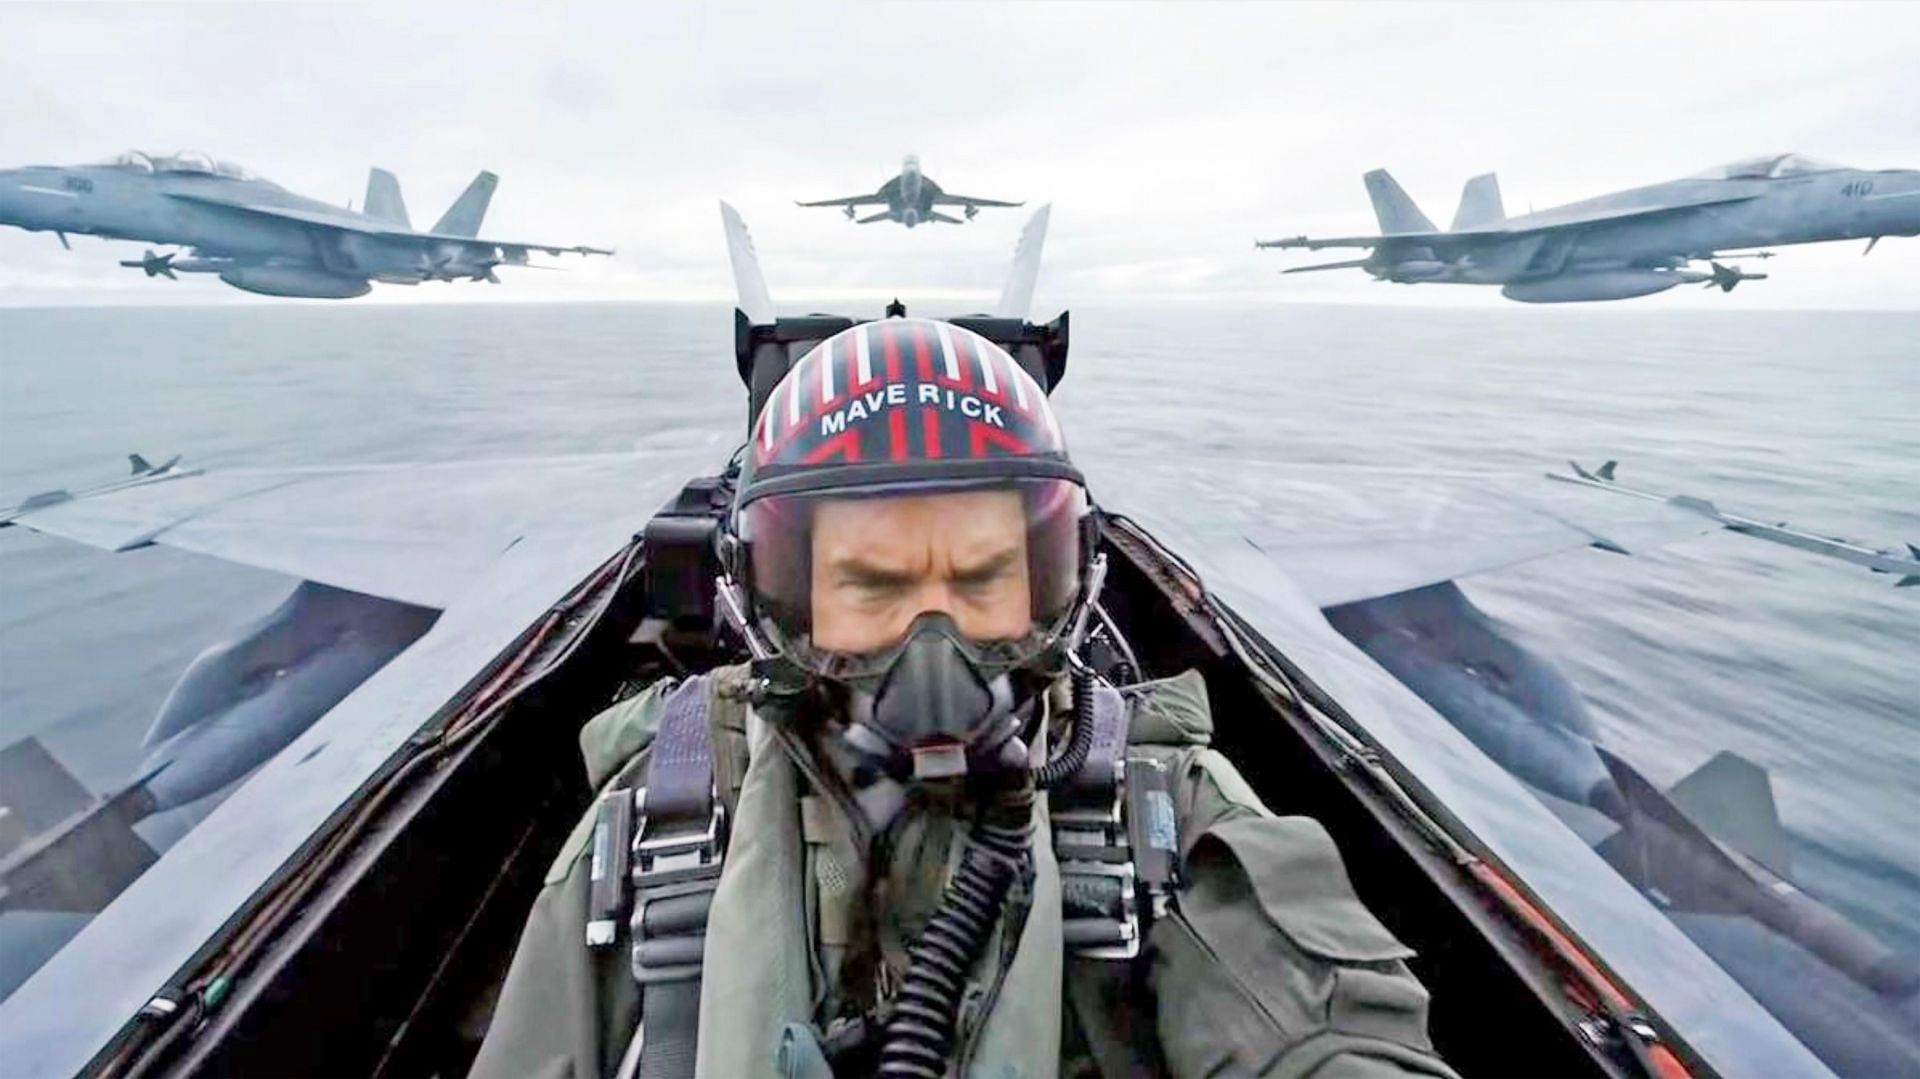 Tom Cruise in a still from Top Gun: Maverick (Image via Paramount Pictures)